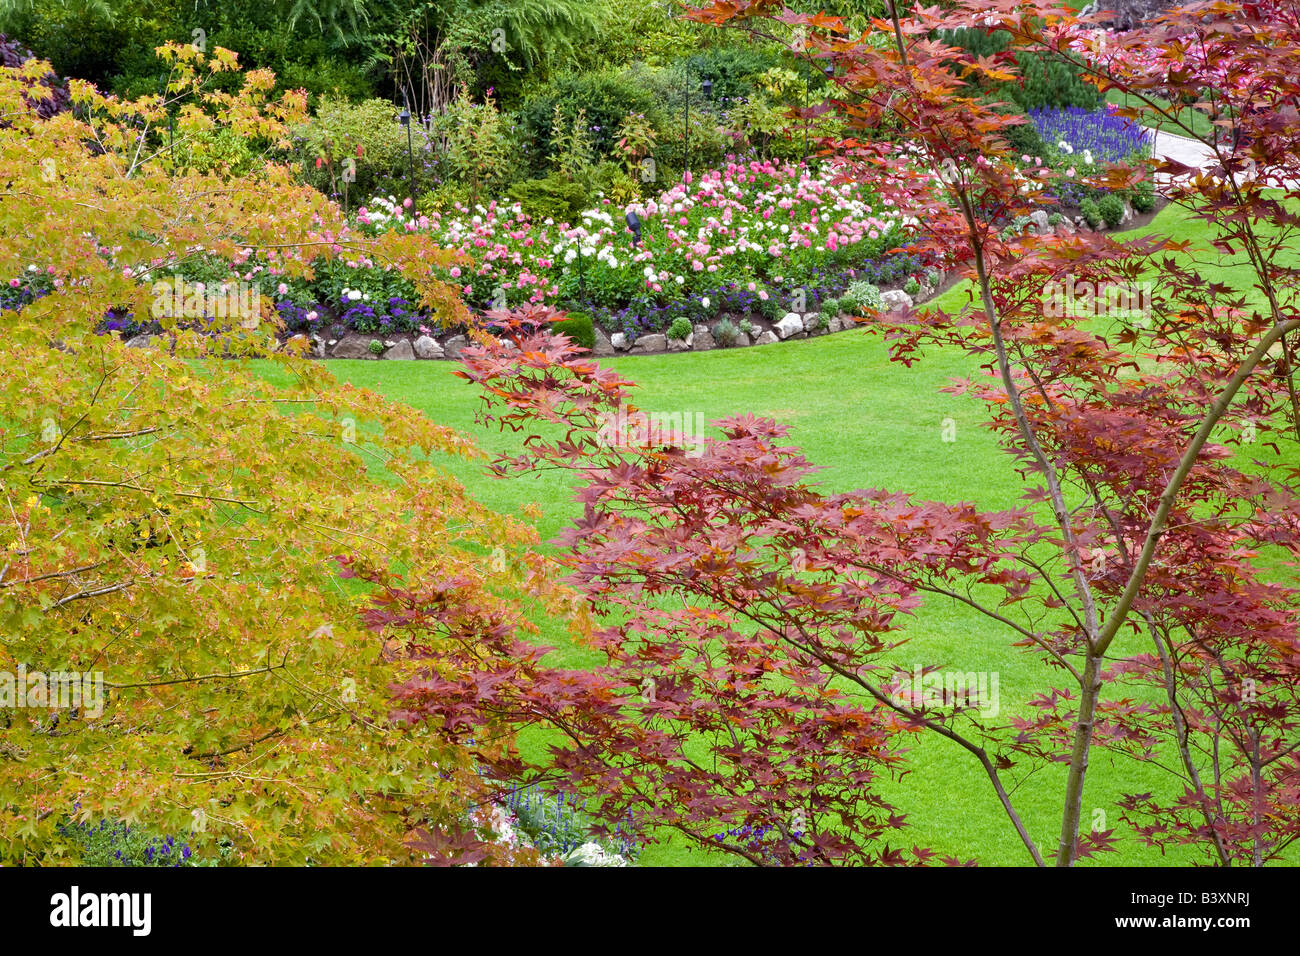 Japanese maple trees and flowers at Butchart Gardens B C Canada Stock Photo